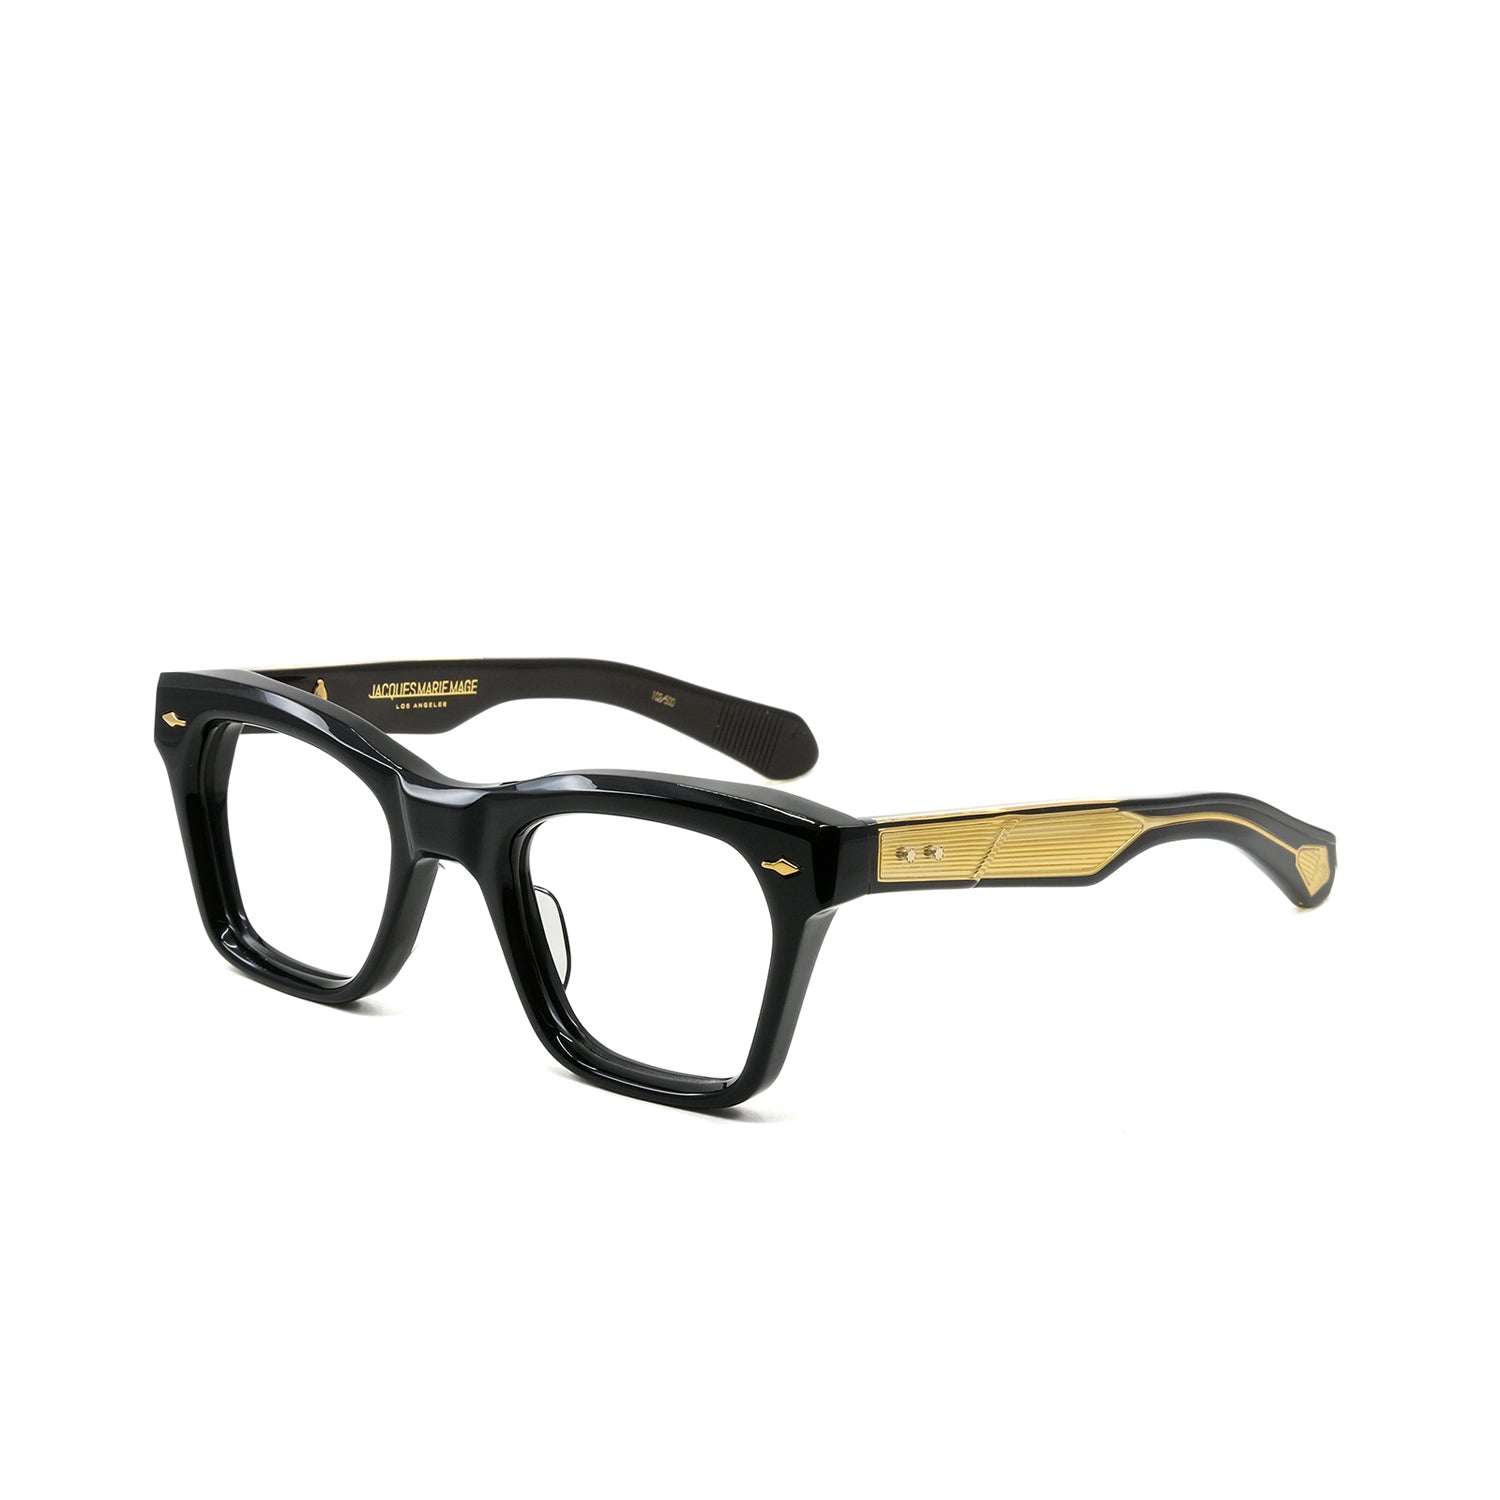 JACQUES MARIE MAGE PICABIA DESIGNER FRAME